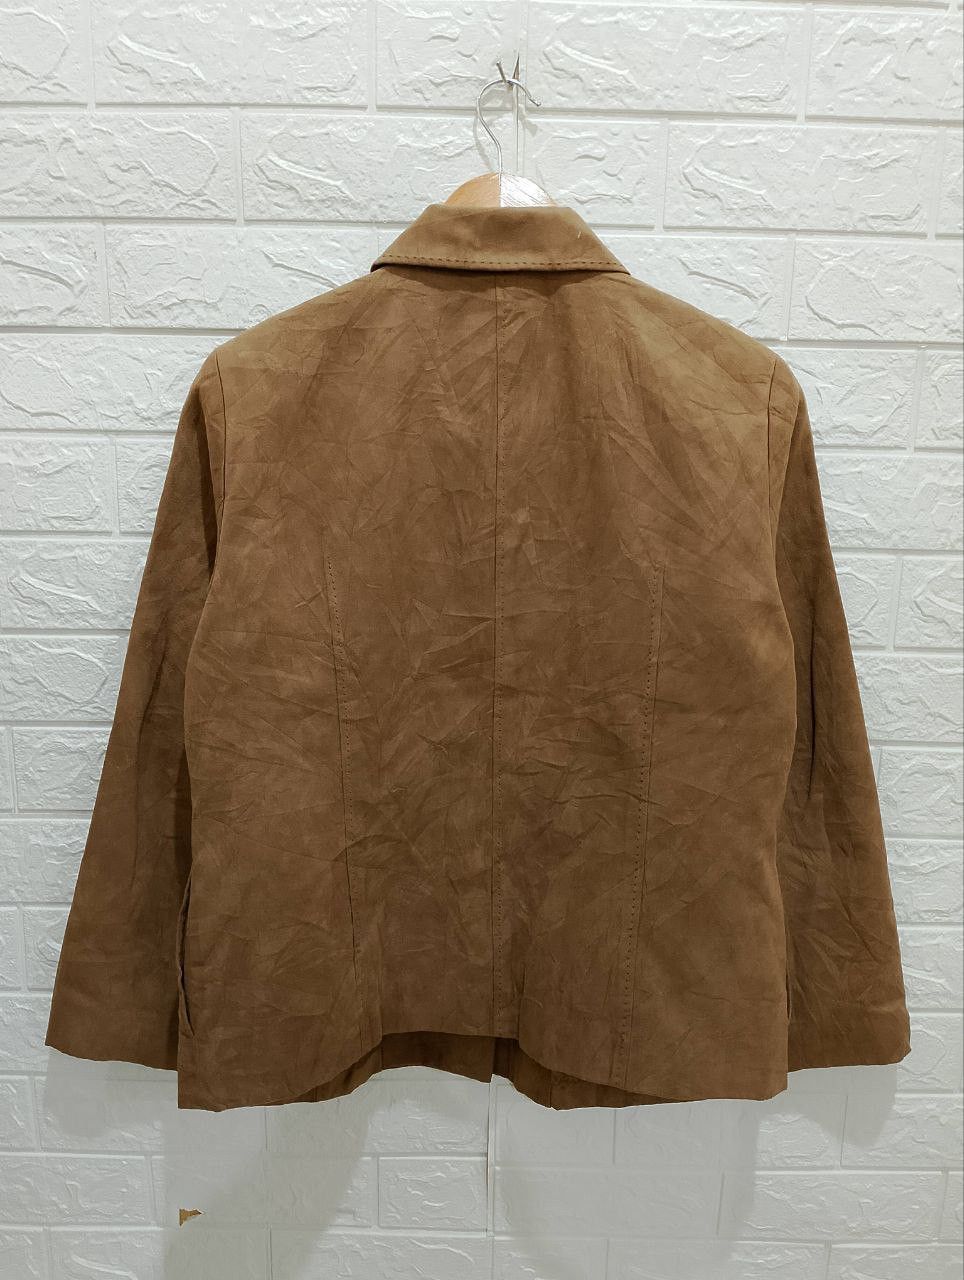 Archival Clothing - BELL AMICA Brown Japan Brand Jacket - 3